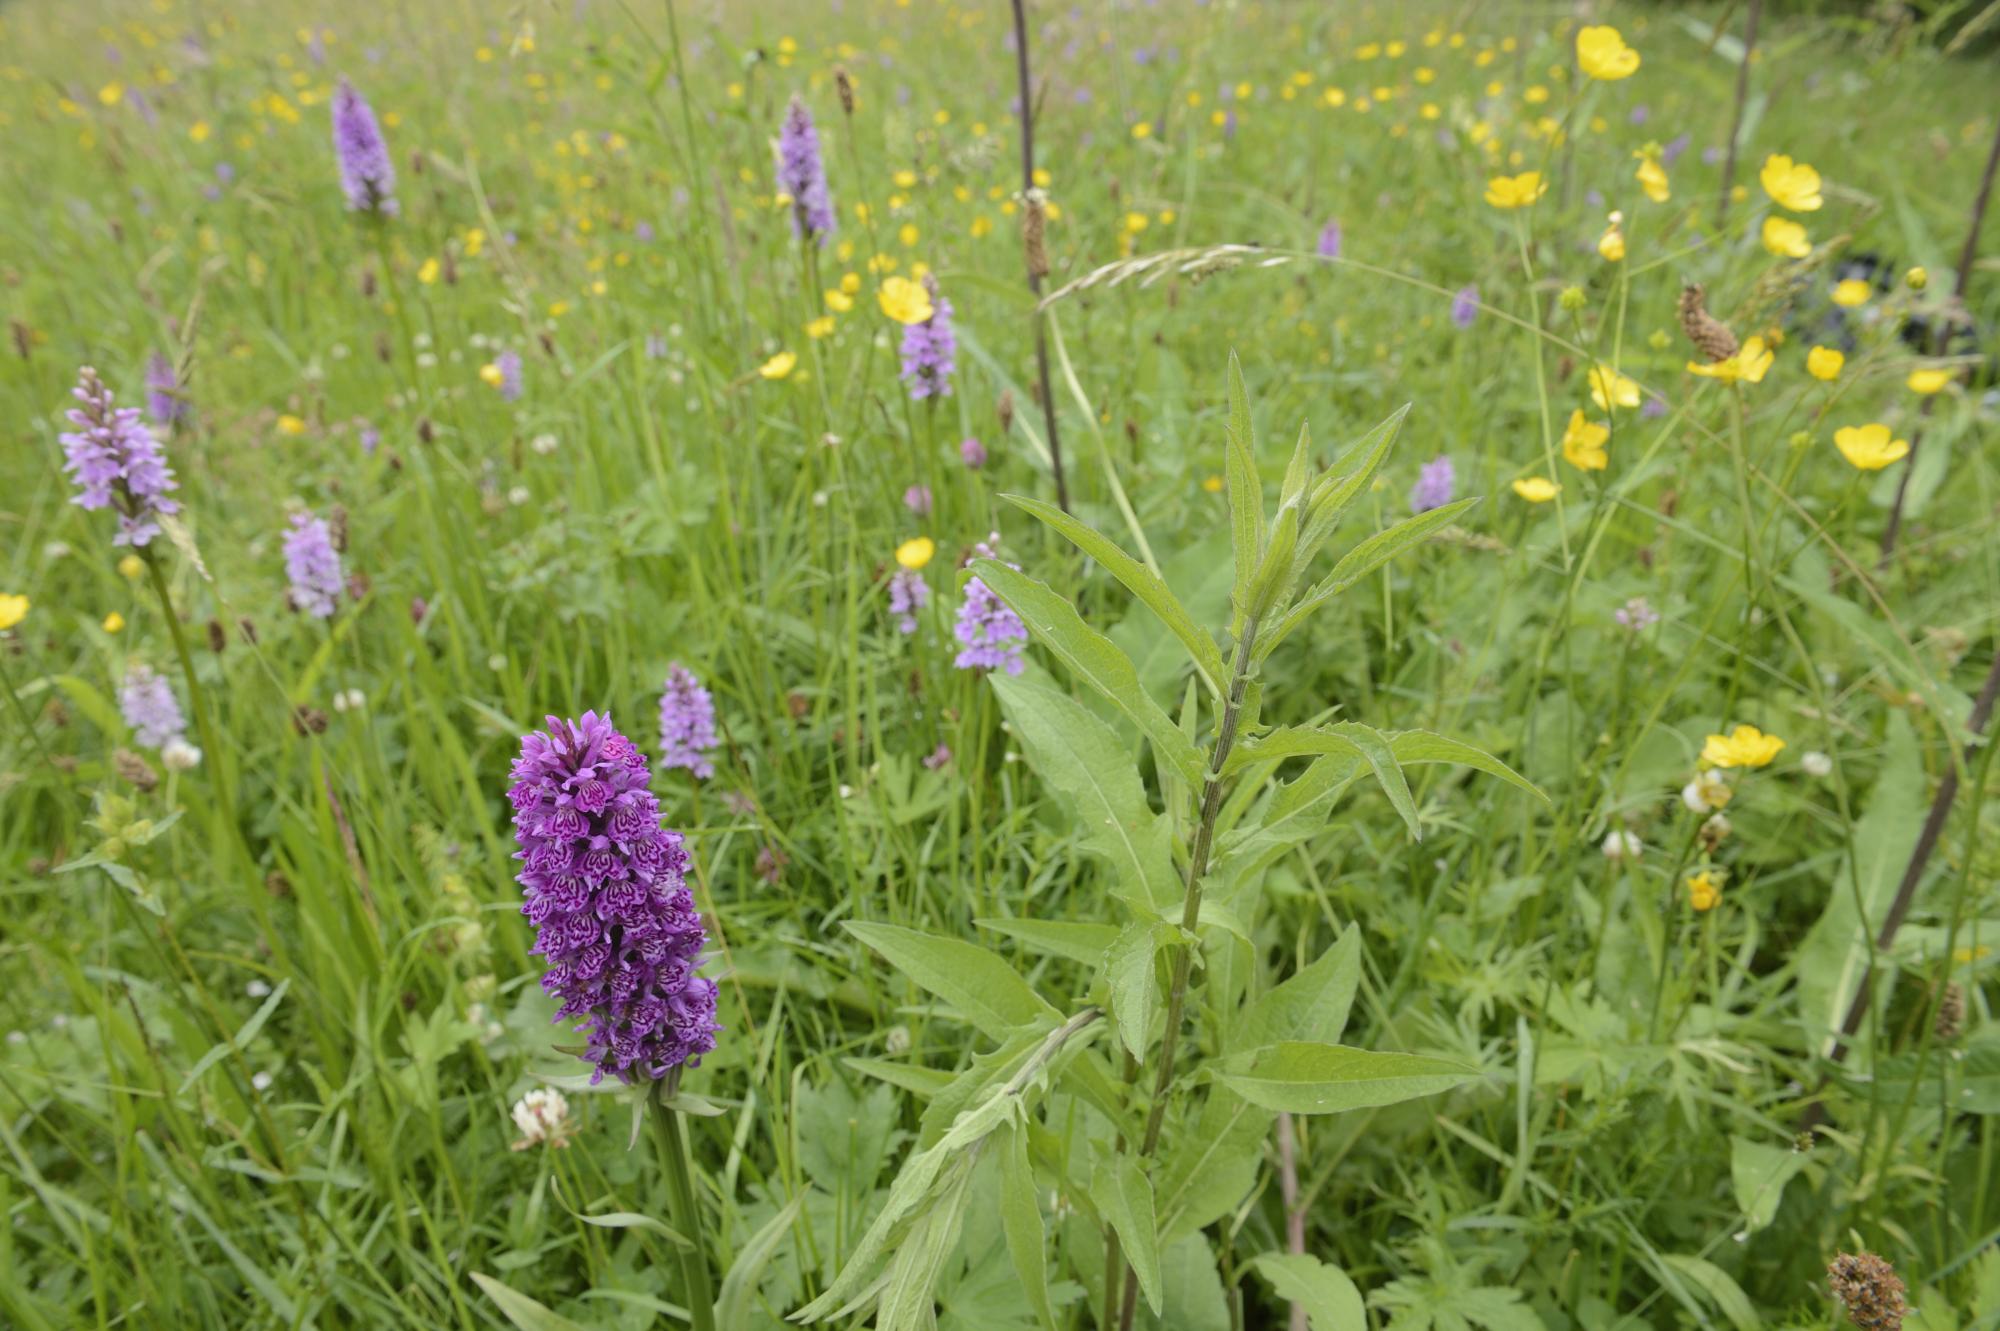 Orchids growing at Weem meadow SSSI near Aberfeldy. July 2016.©Lorne Gill/SNH. For information on reproduction rights contact the Scottish Natural Heritage Image Library on Tel. 01738 444177 or www.nature.scot